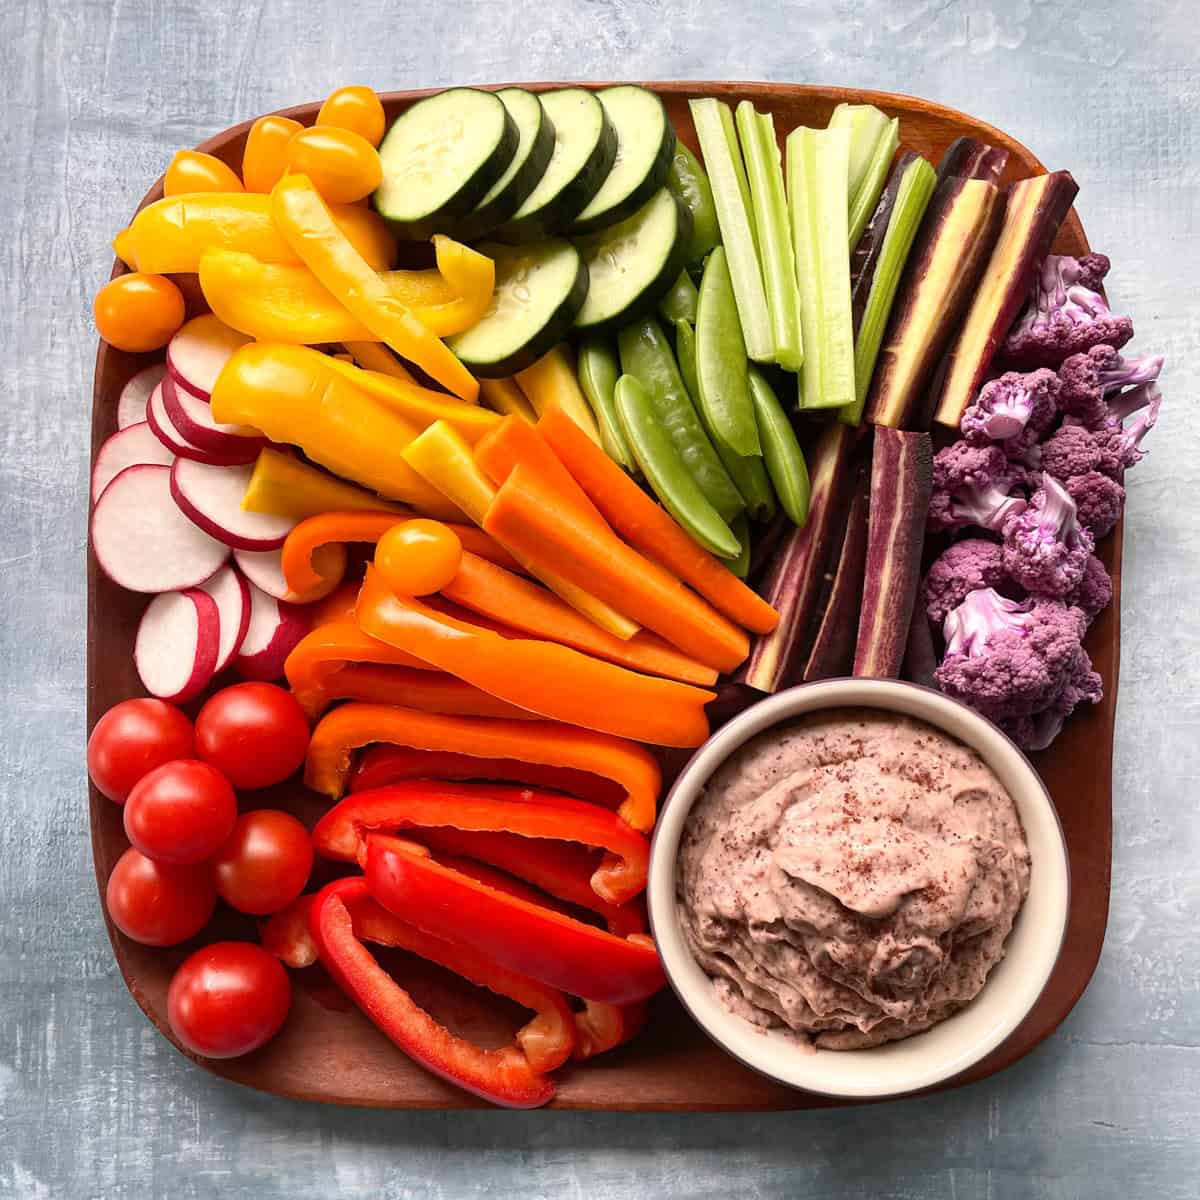 tomatoes, peppers, carrots, radishes, cucumber, and purple cauliflower on a wood plate with hummus.